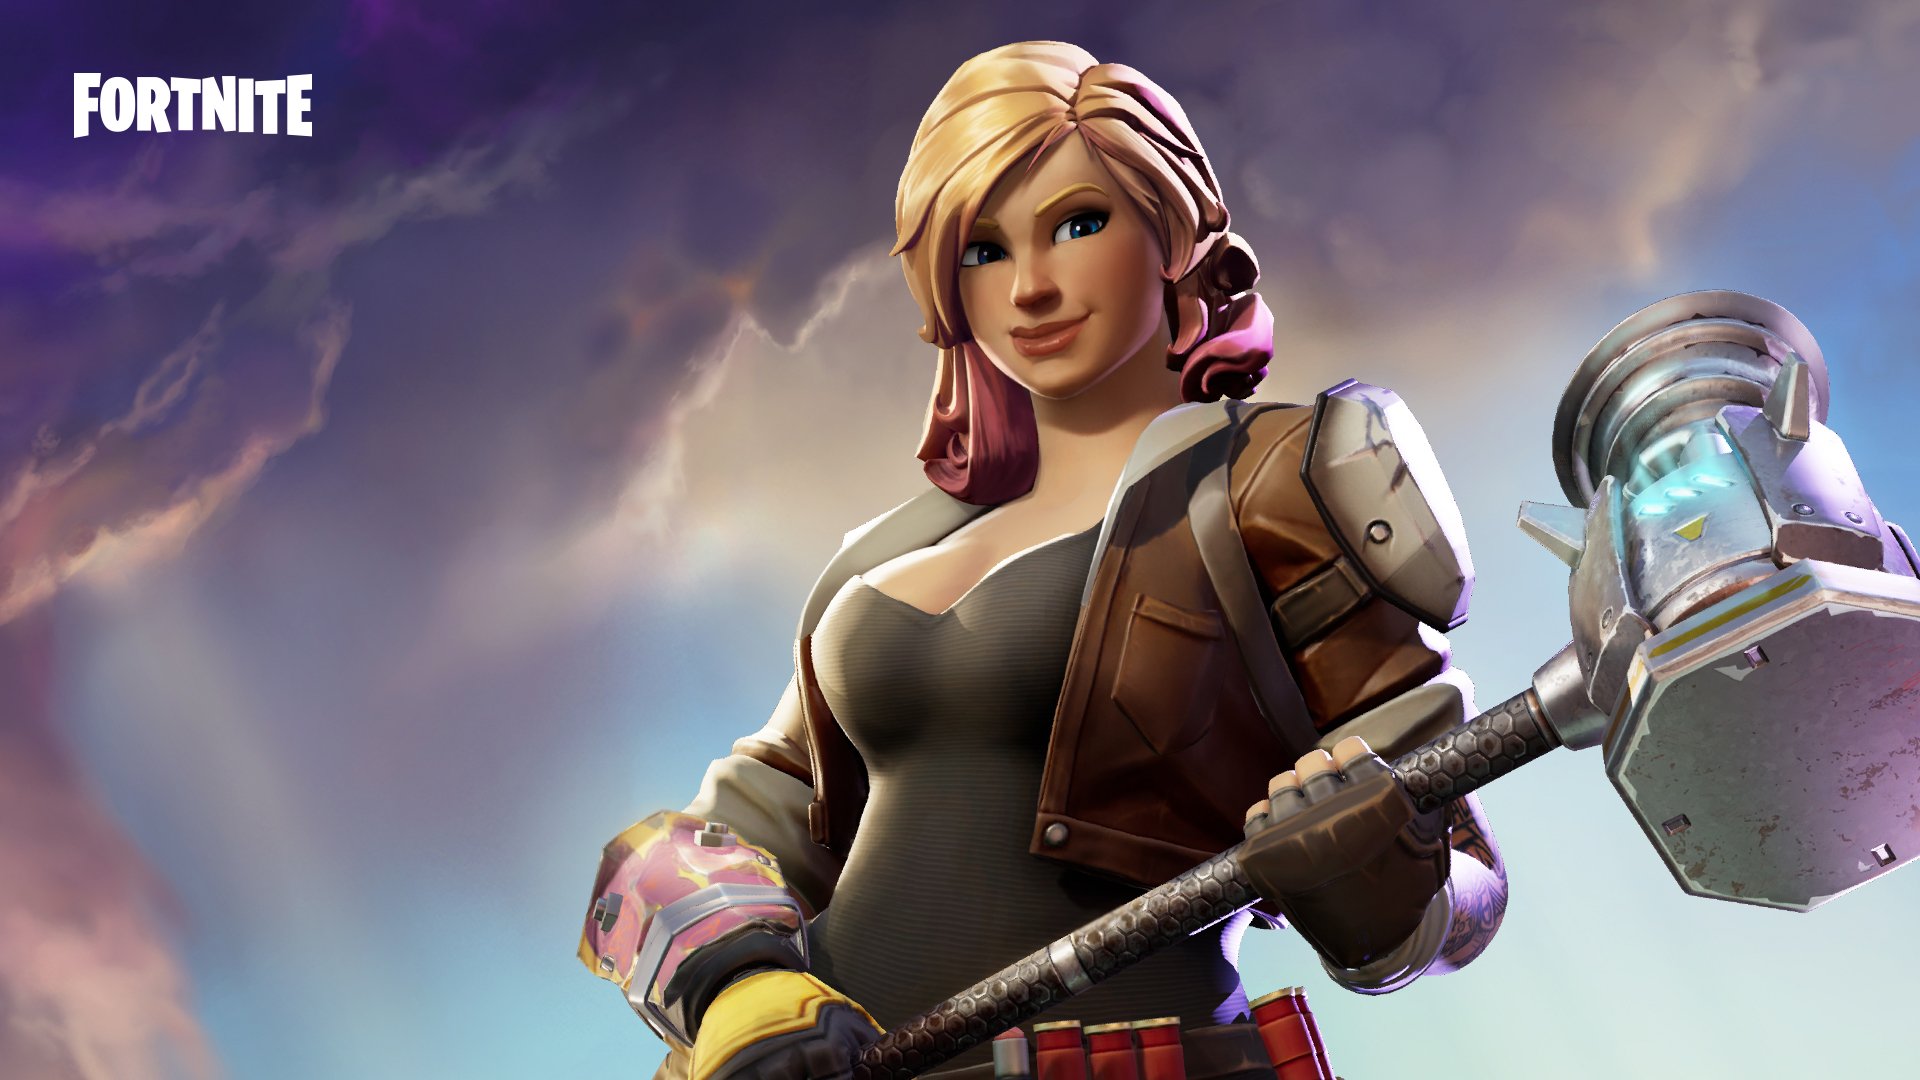 Controversy over Fortnite Cosmetic Items